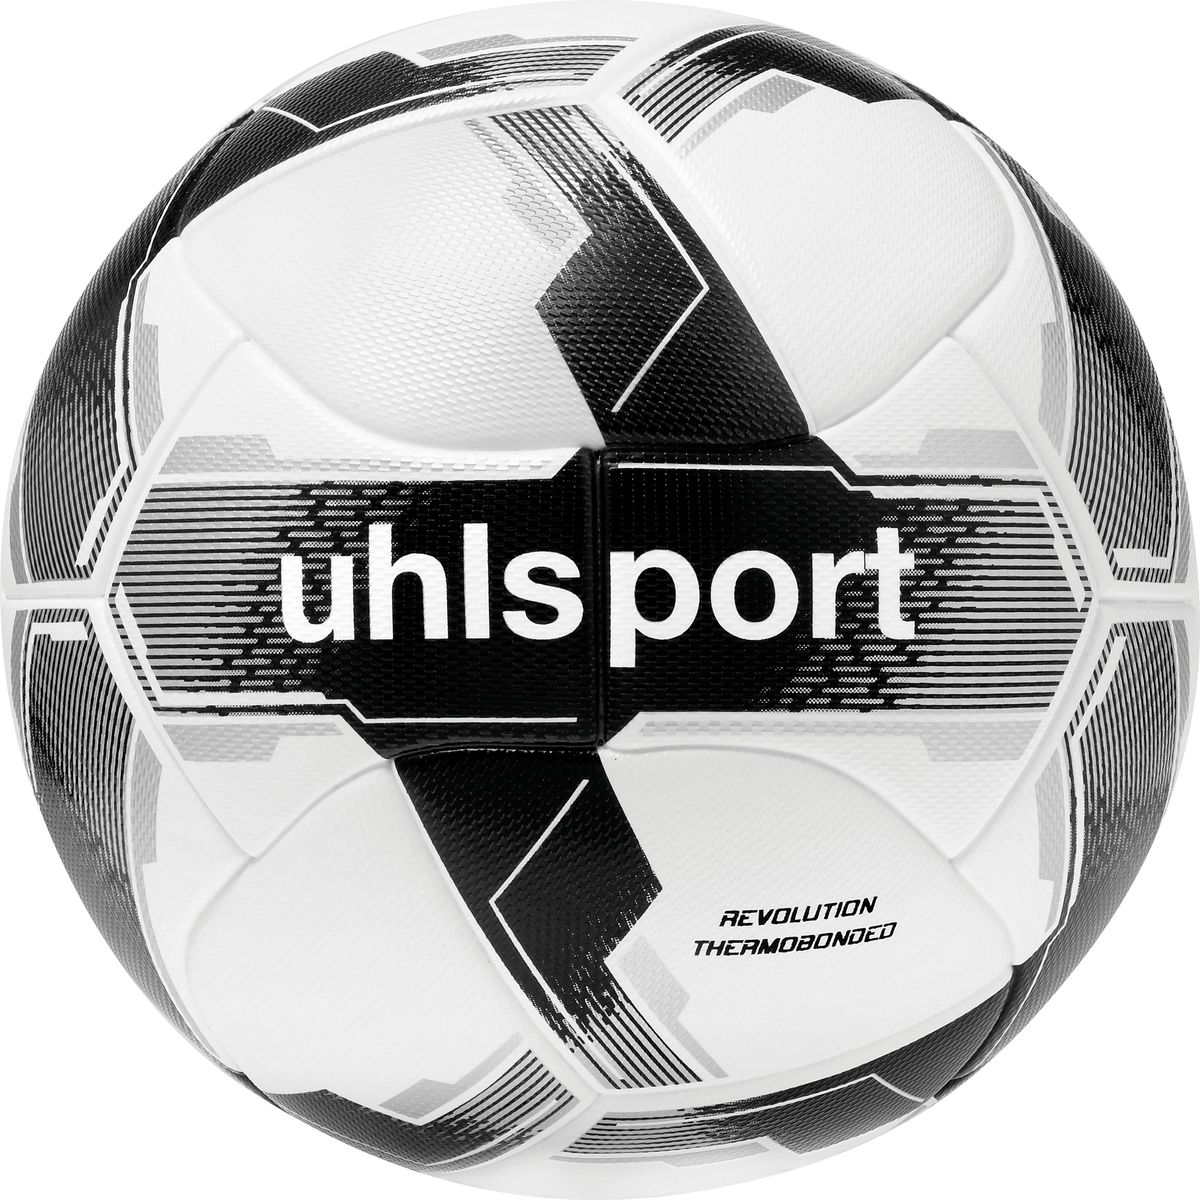 Uhlsport Revolution Thermobonded Outdoor-Fußball